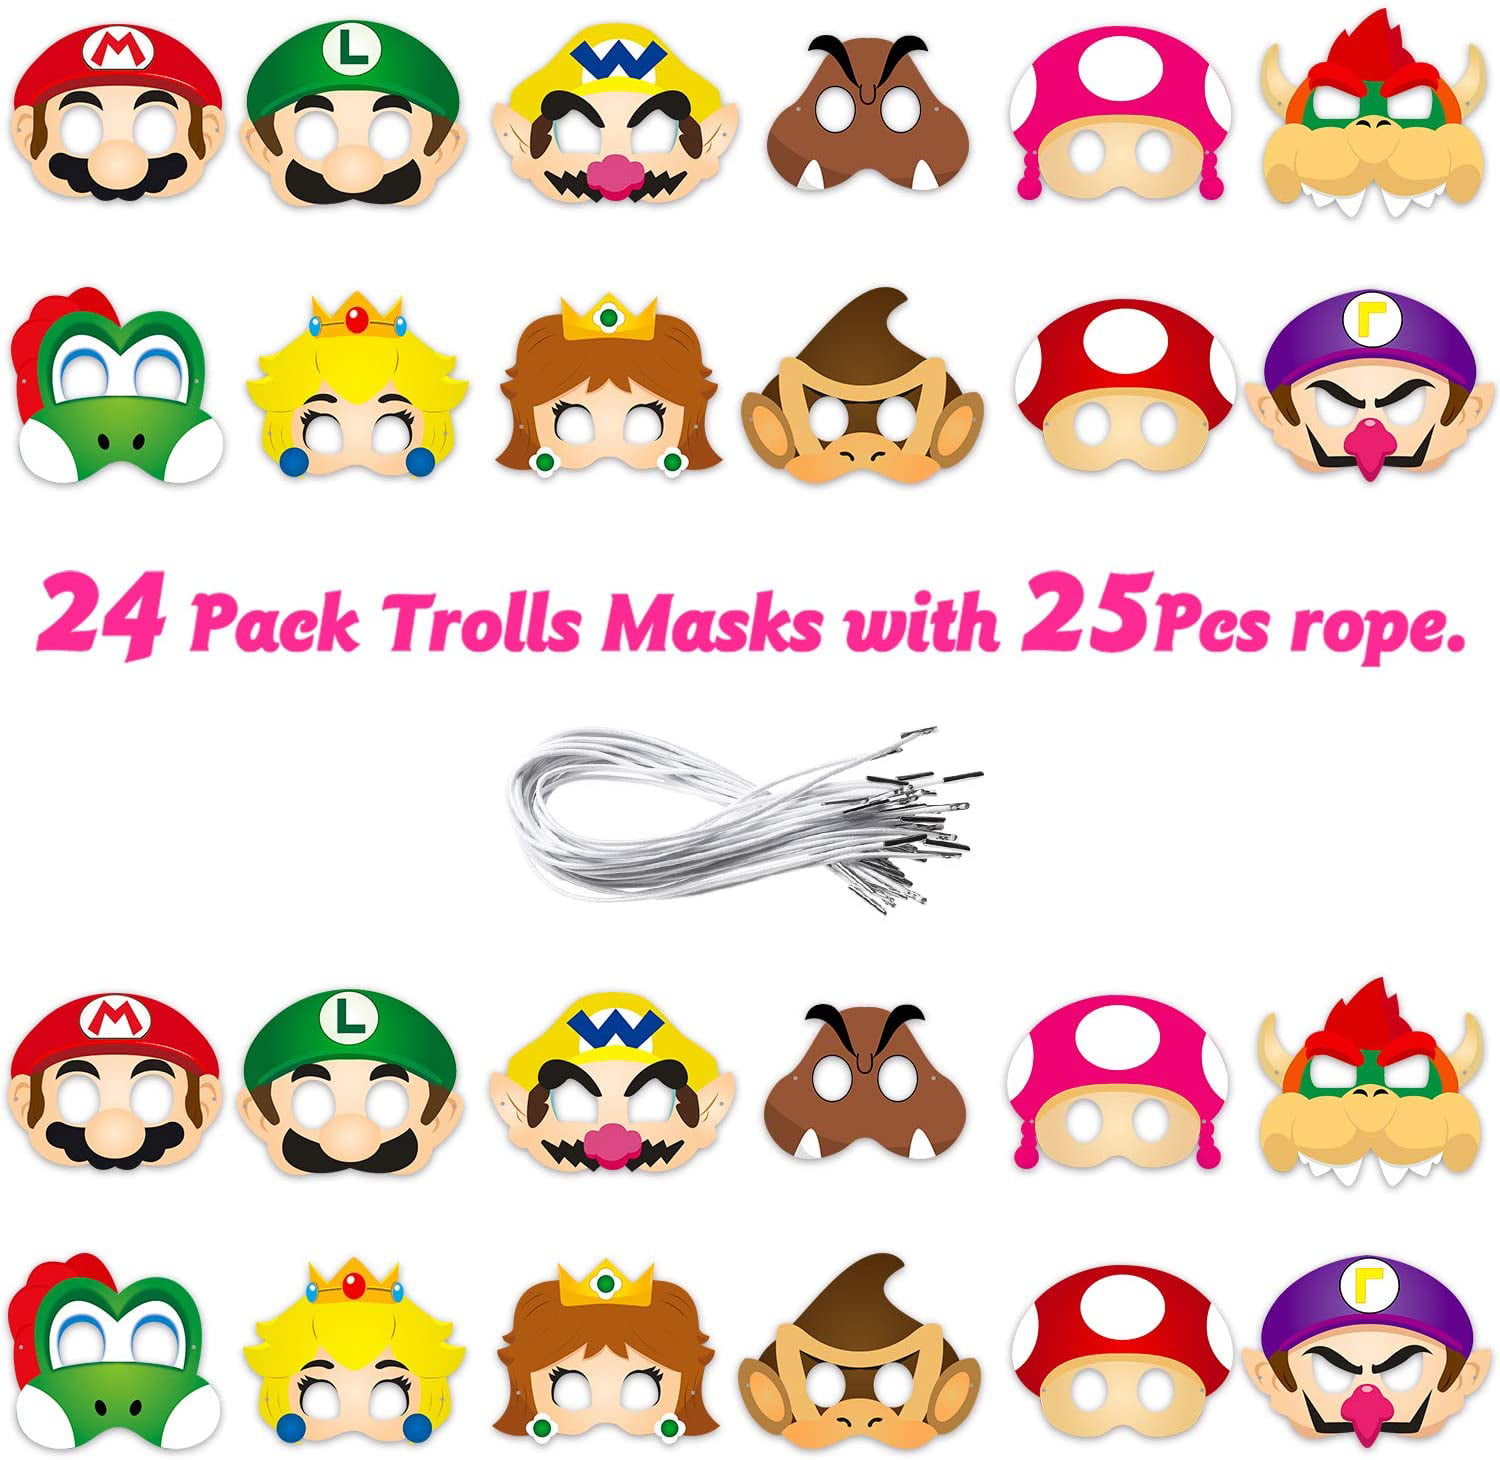 B2jkae 12P Mario Masks Themed Costumes Masks Party Supplies Birthday Party Favors Dress Up Costumes Masks Photo Booth Prop Cartoon Character Cosplay Pretend Play Accessories Gift for Kids Boys Girls